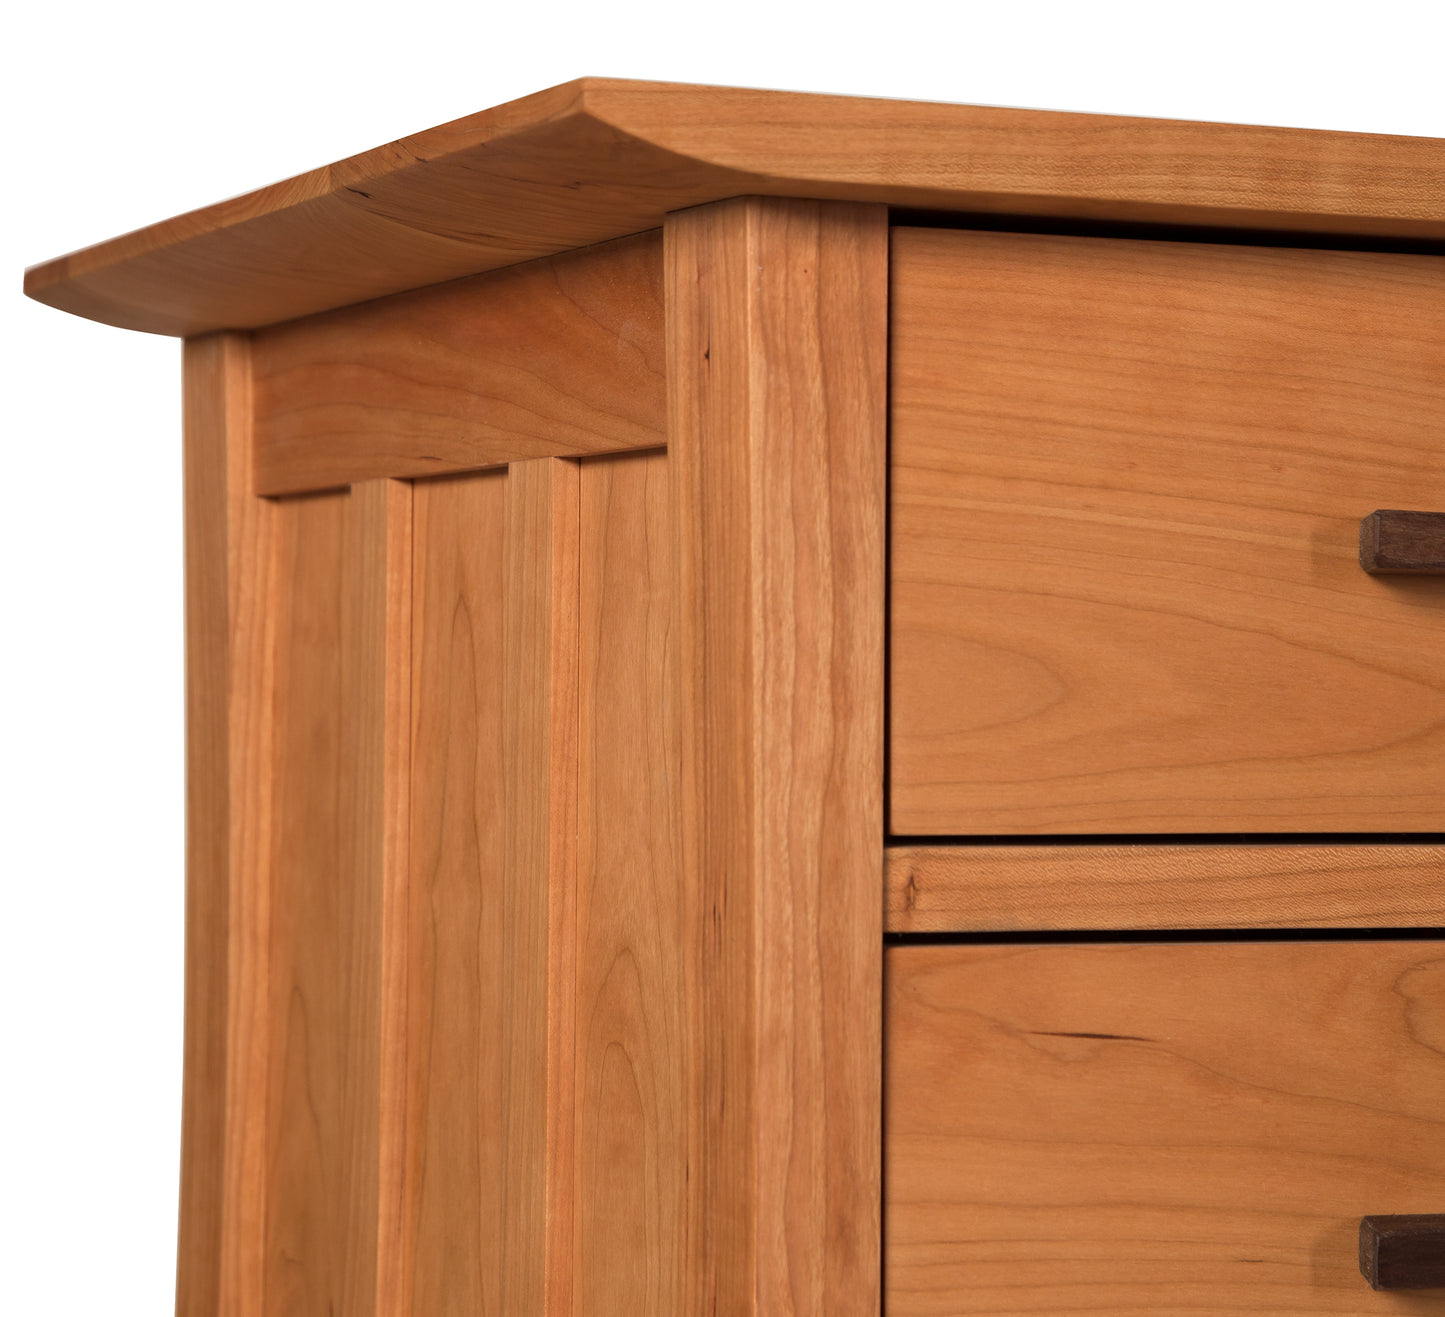 Close-up of a Vermont Furniture Designs Contemporary Craftsman 3-Drawer Nightstand with a visible side panel and drawer fronts, showcasing the wood grain and joinery in solid wood with an eco-friendly oil finish.